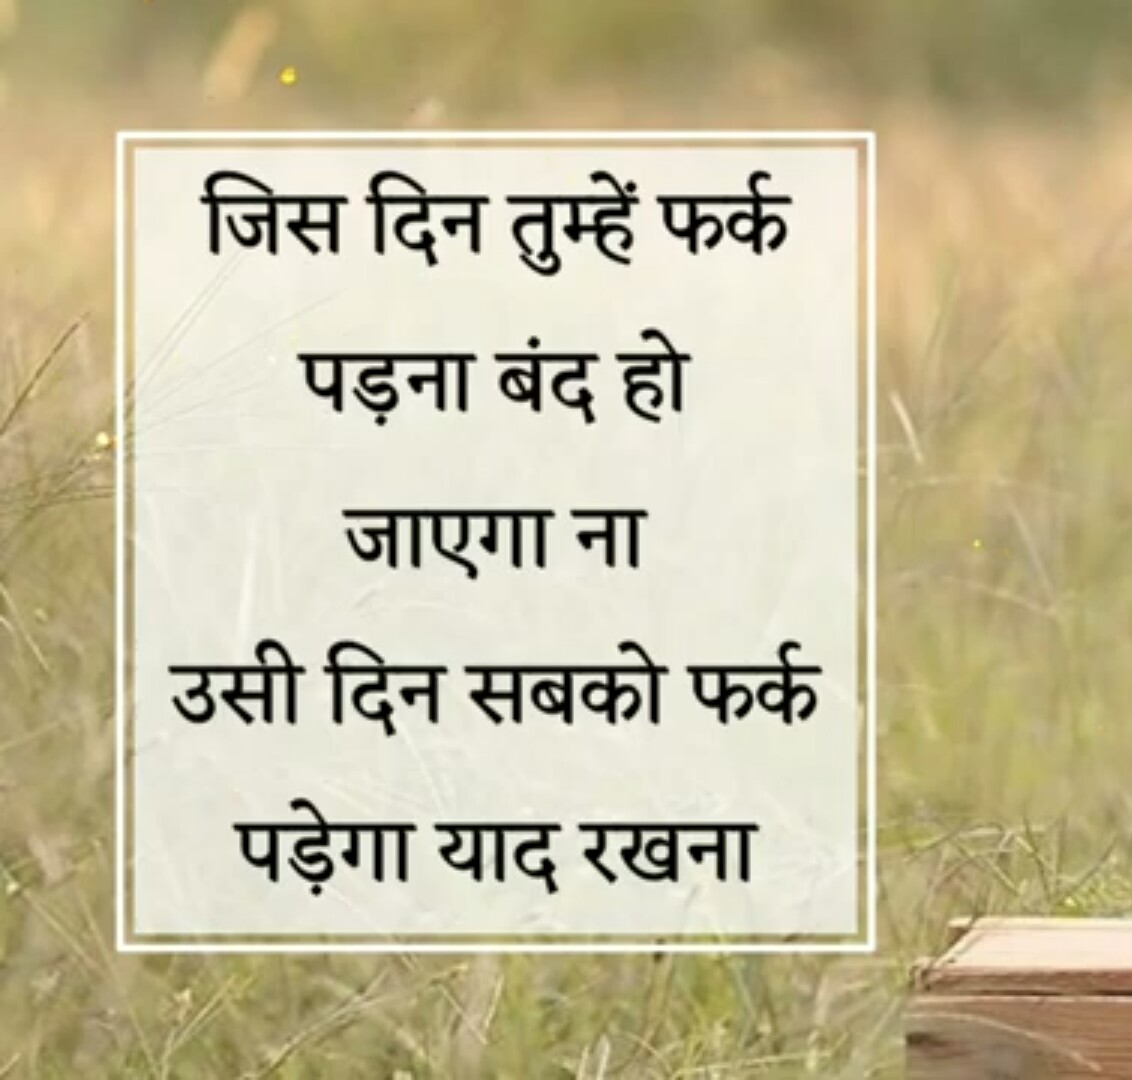 Best life quotes in hindi with images | सर्वश्रेष्ठ ...